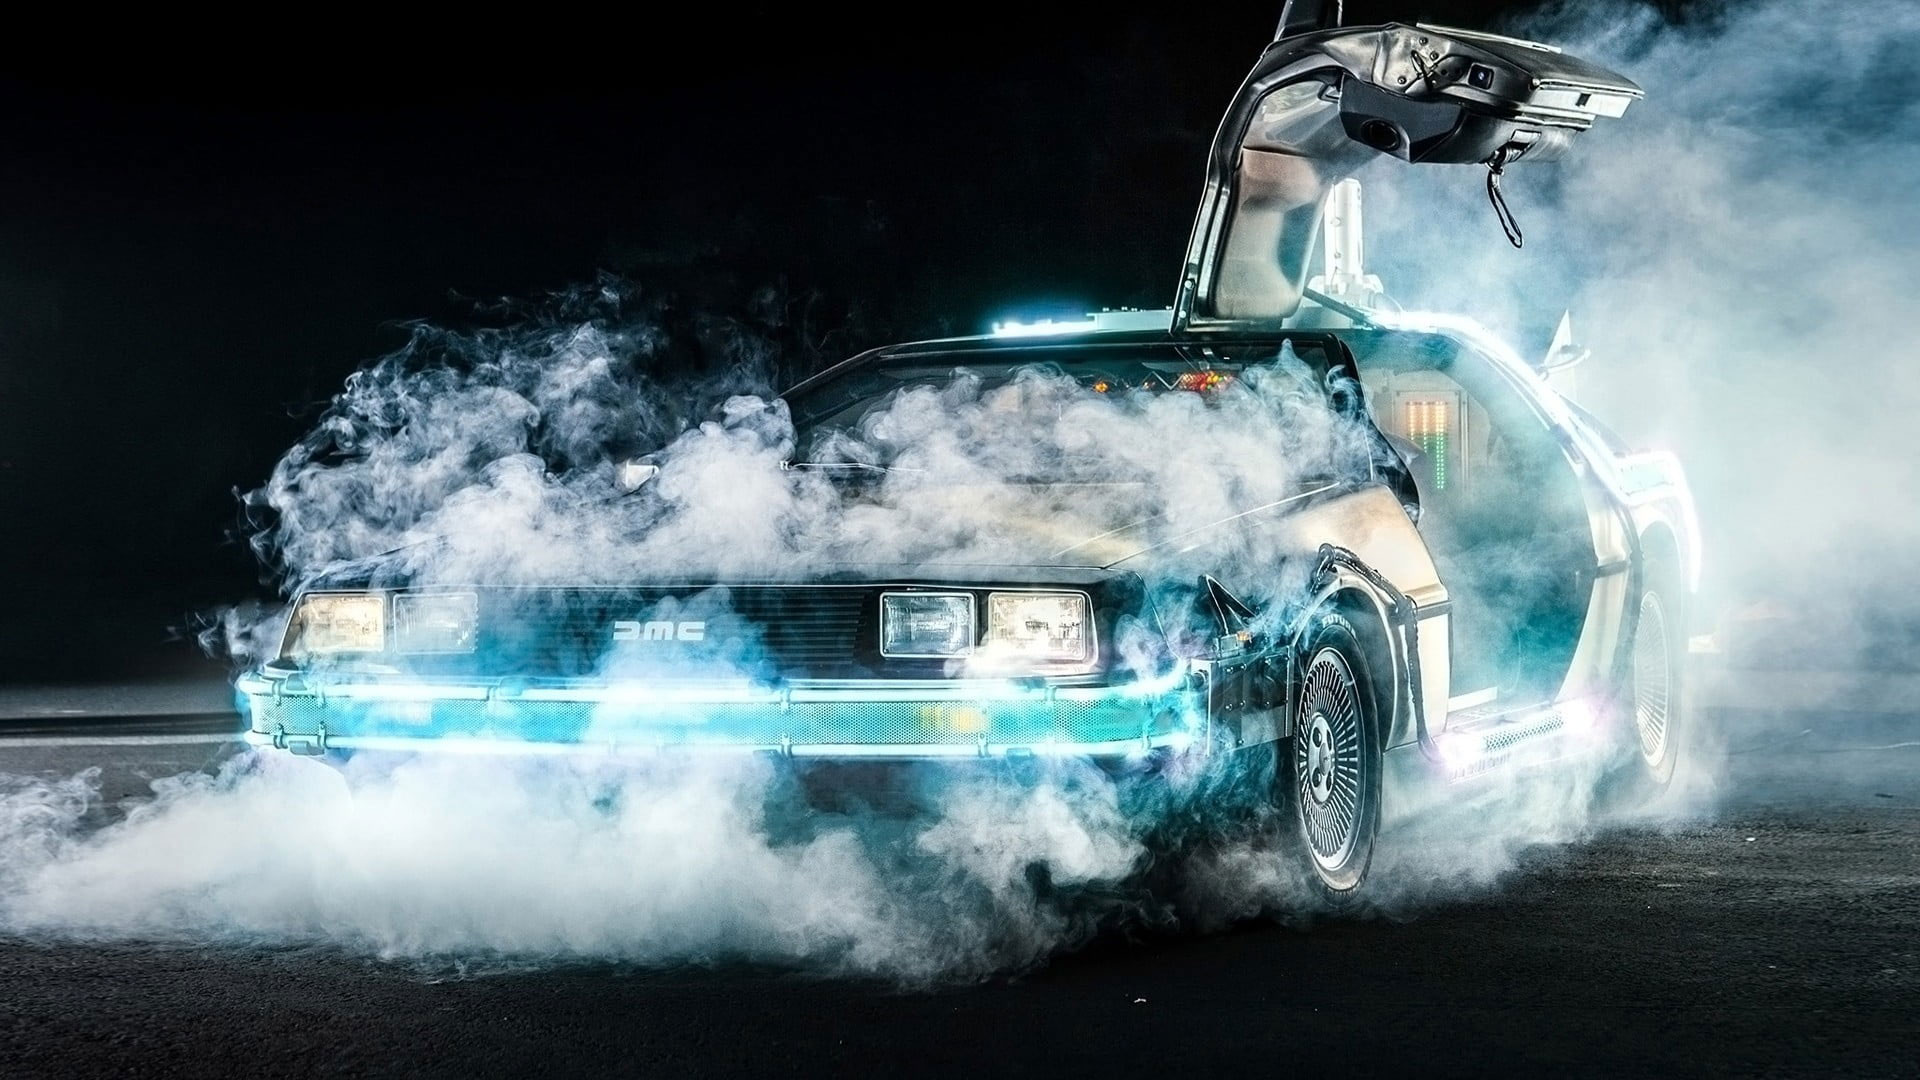 Green Vehicle Wallpaper, Back To The Future